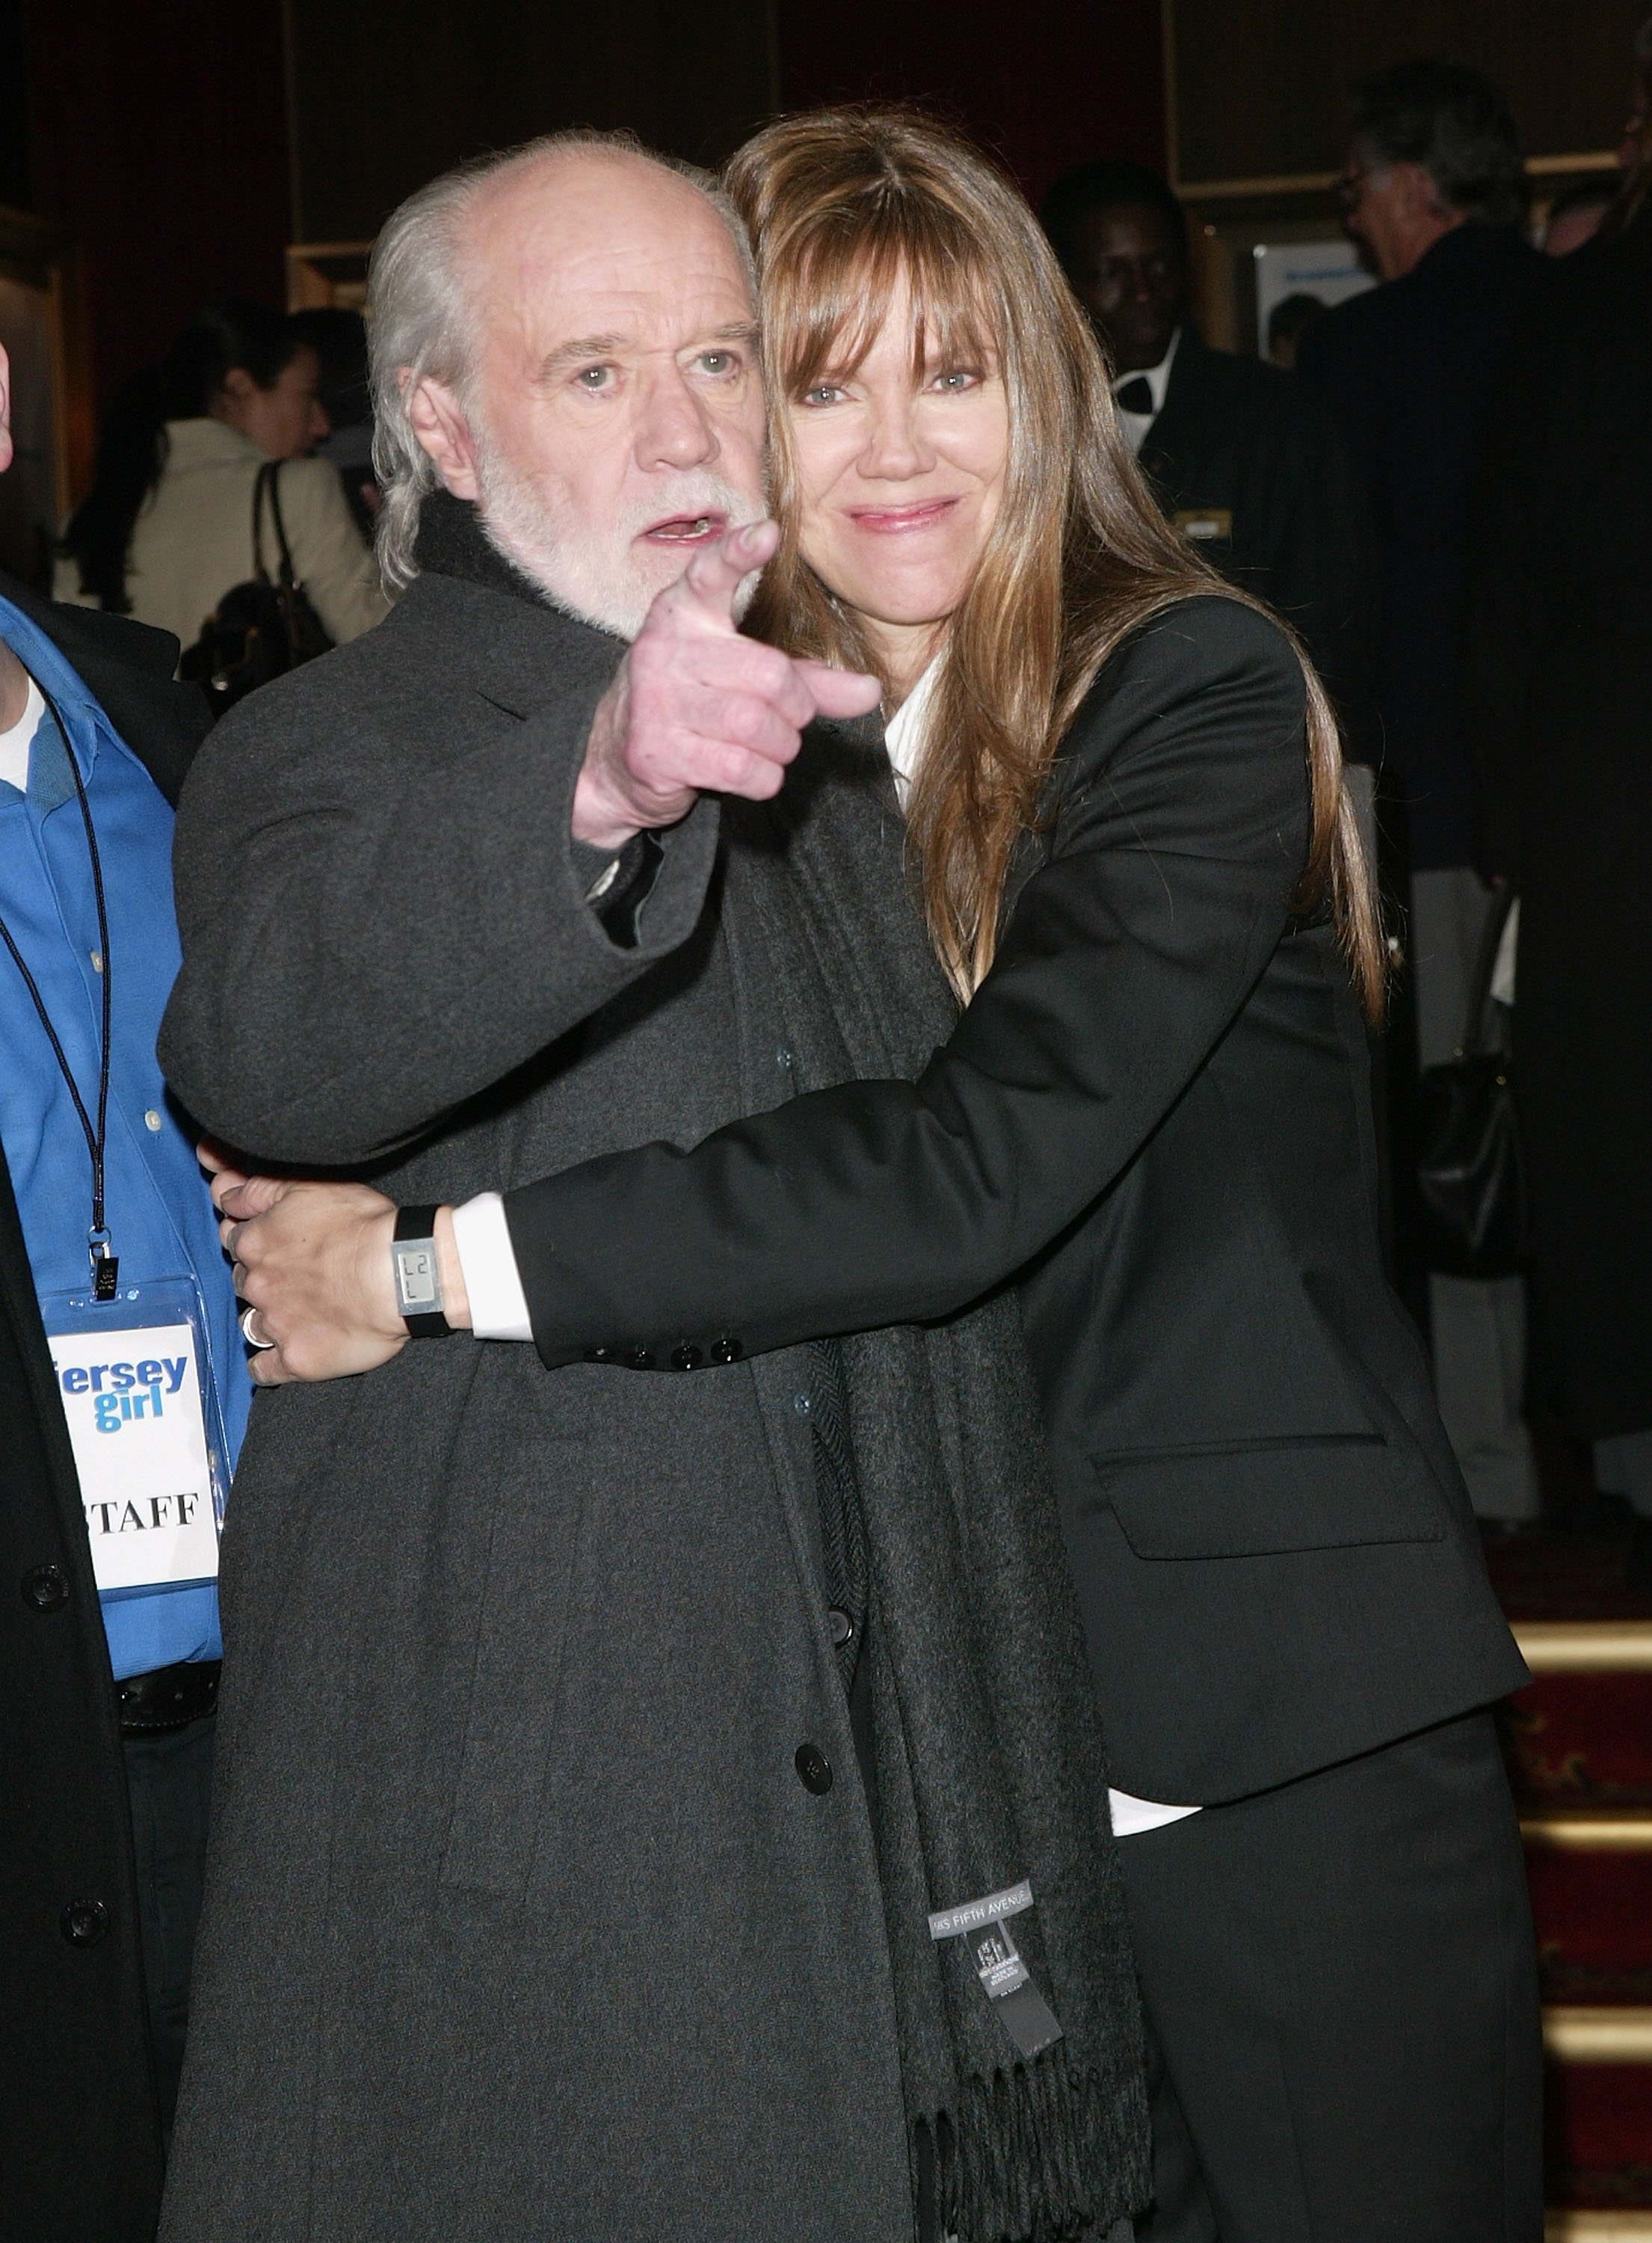 Comedian George Carlin and his wife Sally Wade attend the "jersey girl" the film premiered March 9, 2004 at the Ziegfeld Theater, New York.  |  Source: Getty Images